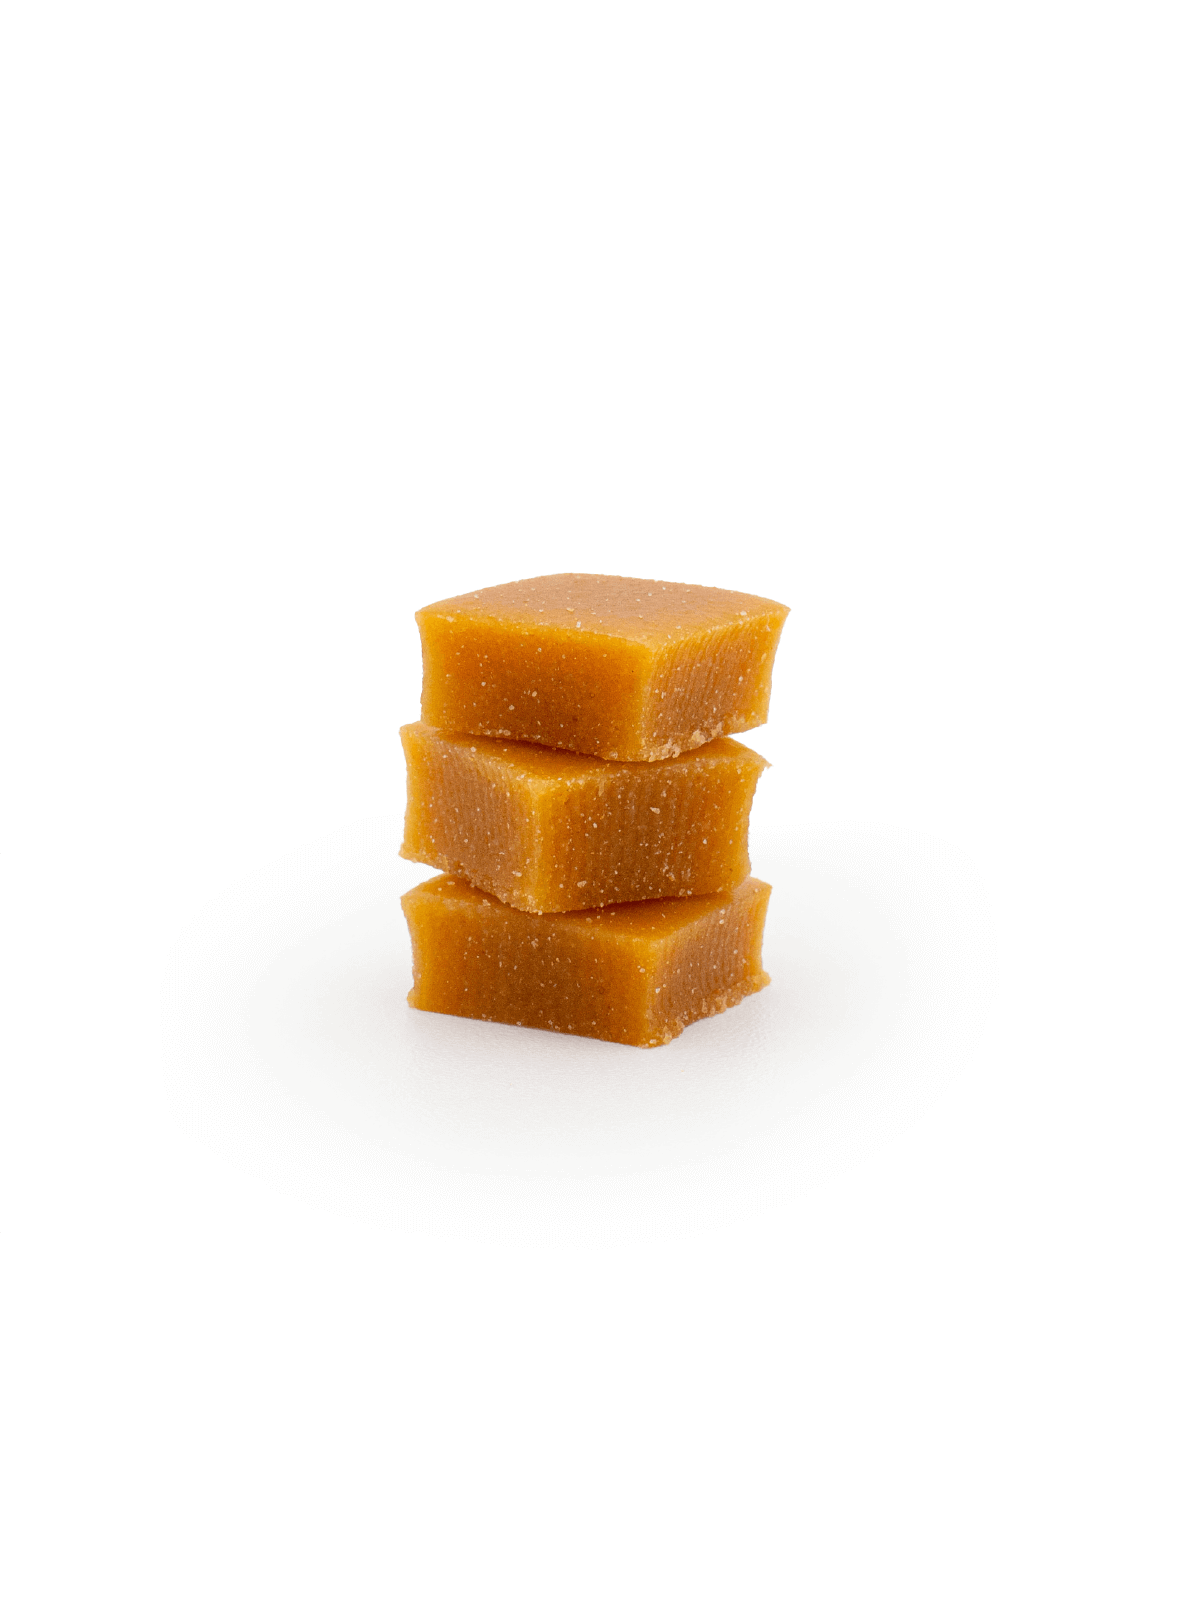 Image of the Multifit Gummy stacked